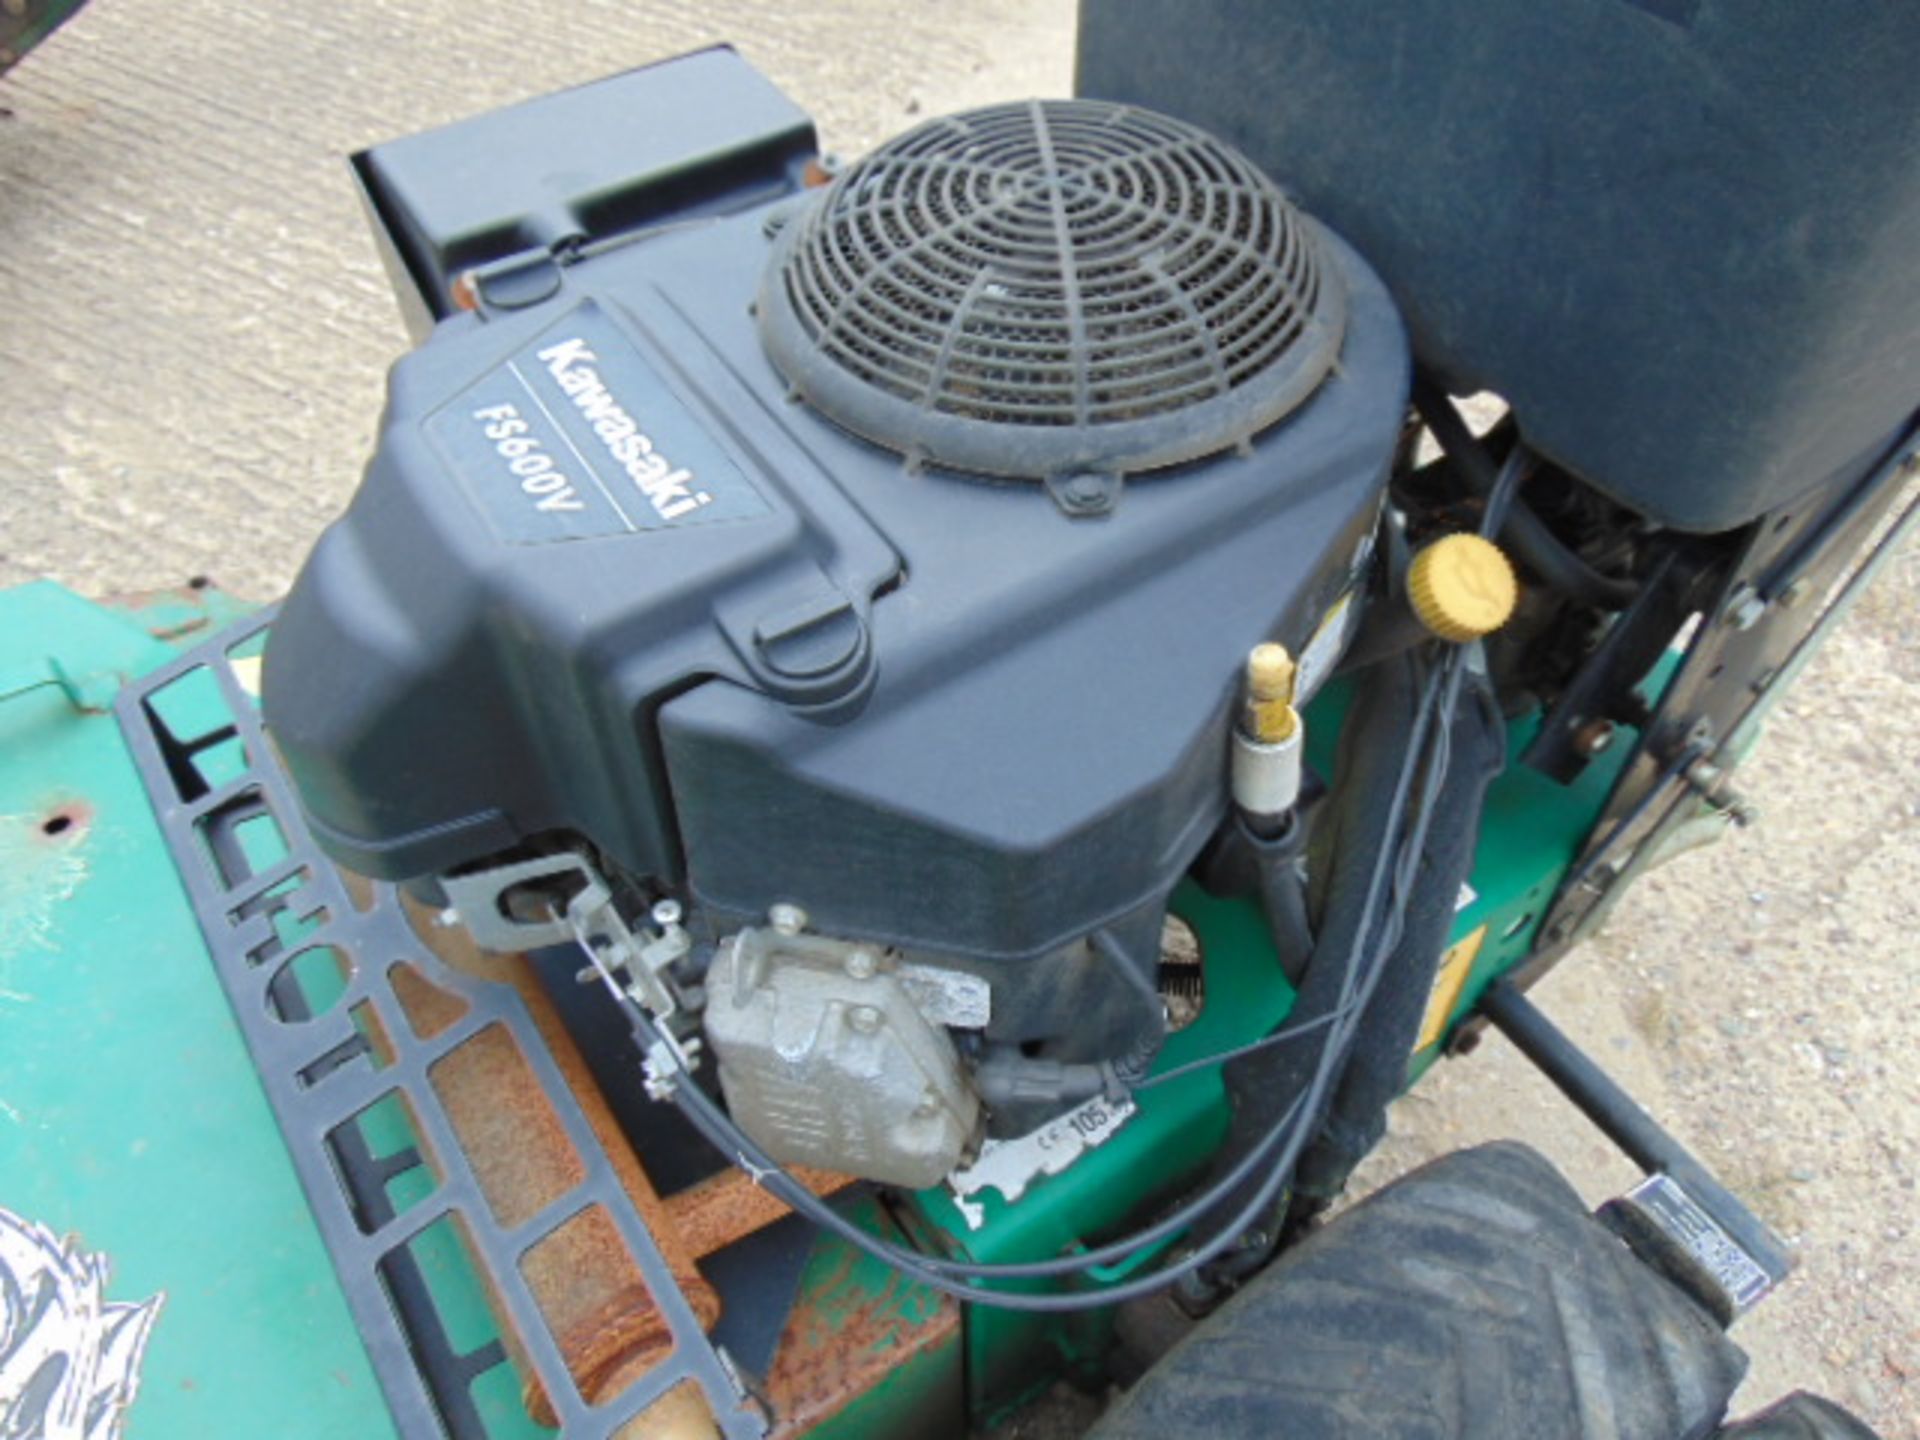 2015 Bobcat Hydrodrive 52 inches zero turn Mower ONLY 1277 HOURS! - Image 7 of 9